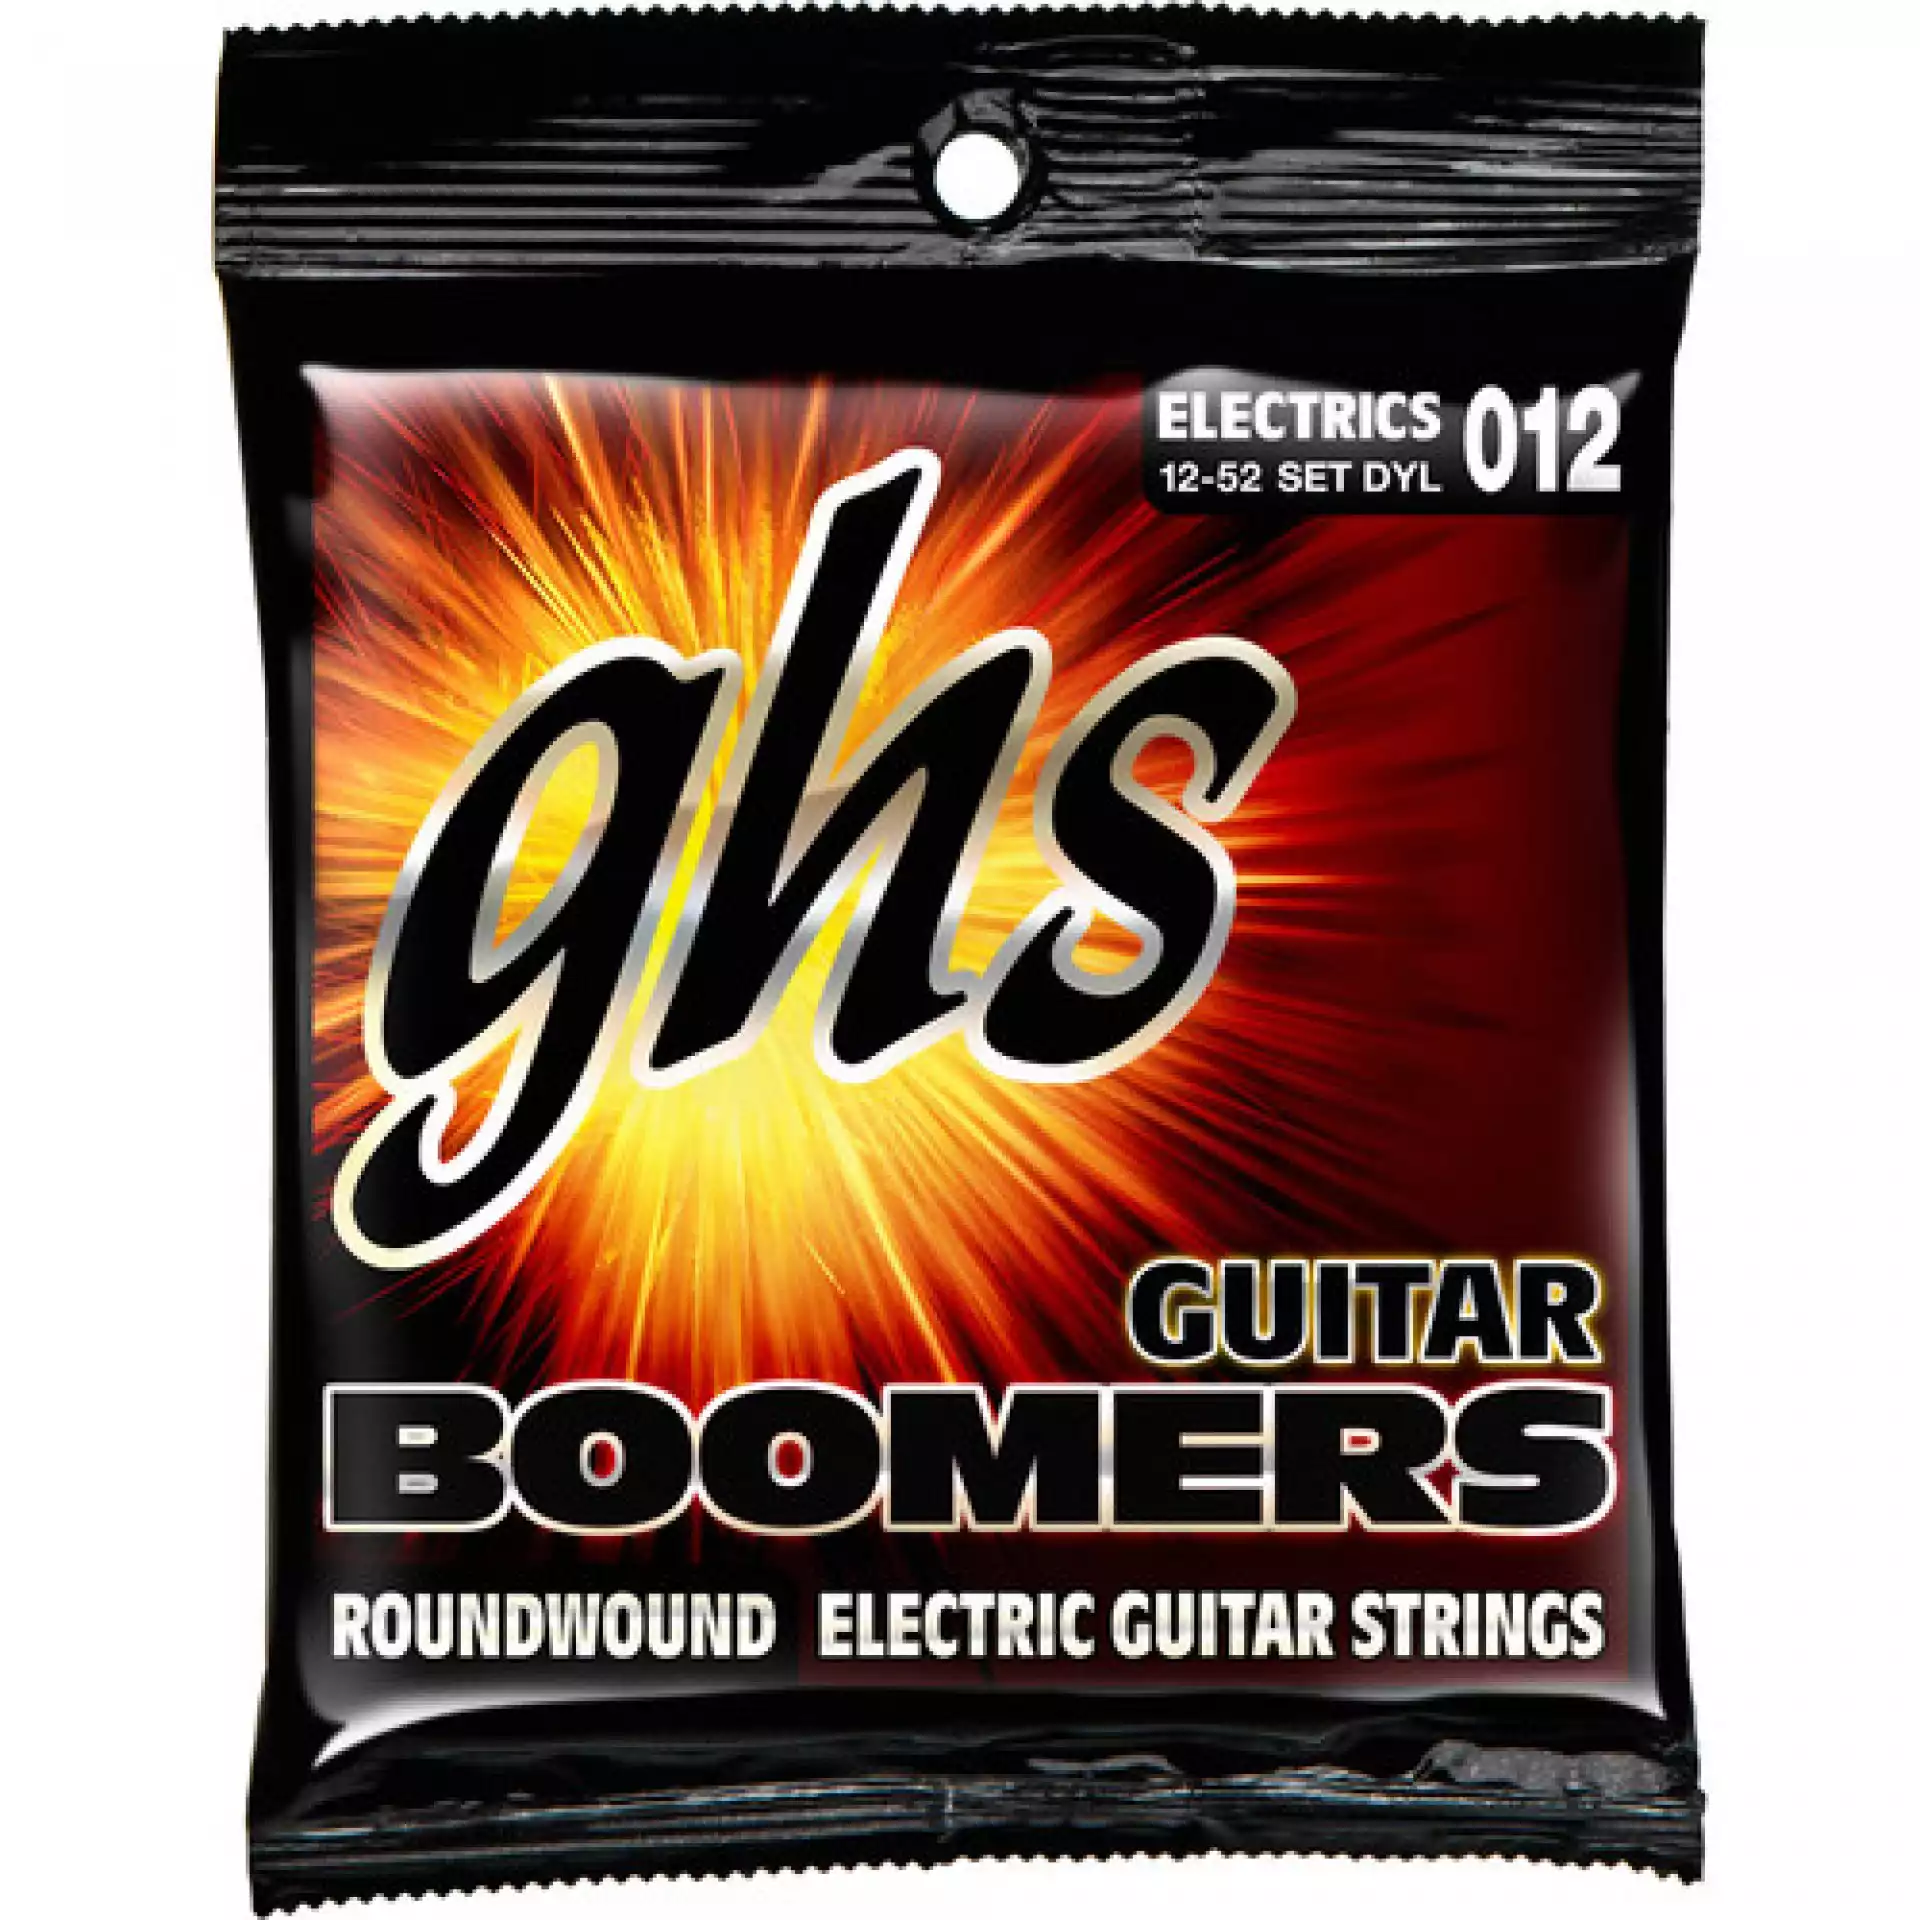 GHS DYL Light Boomers Wound 3rd Roundwound Electric Guitar Strings (6-String Set, 12 - 52)